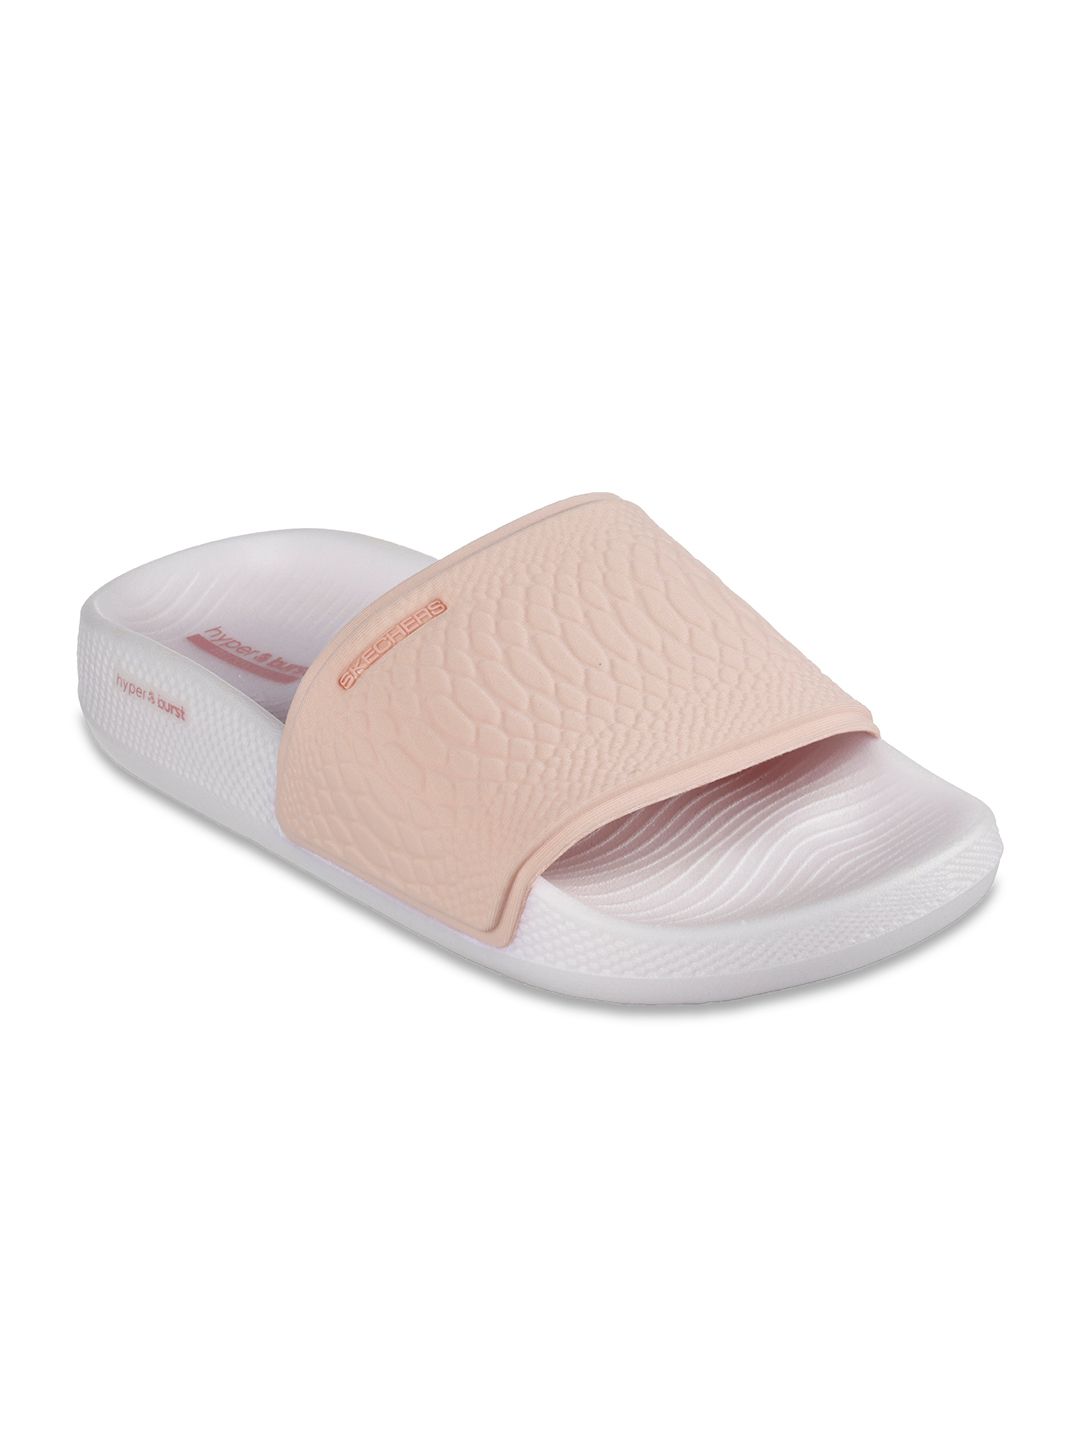 Skechers Women Pink & White Solid Sliders Price in India